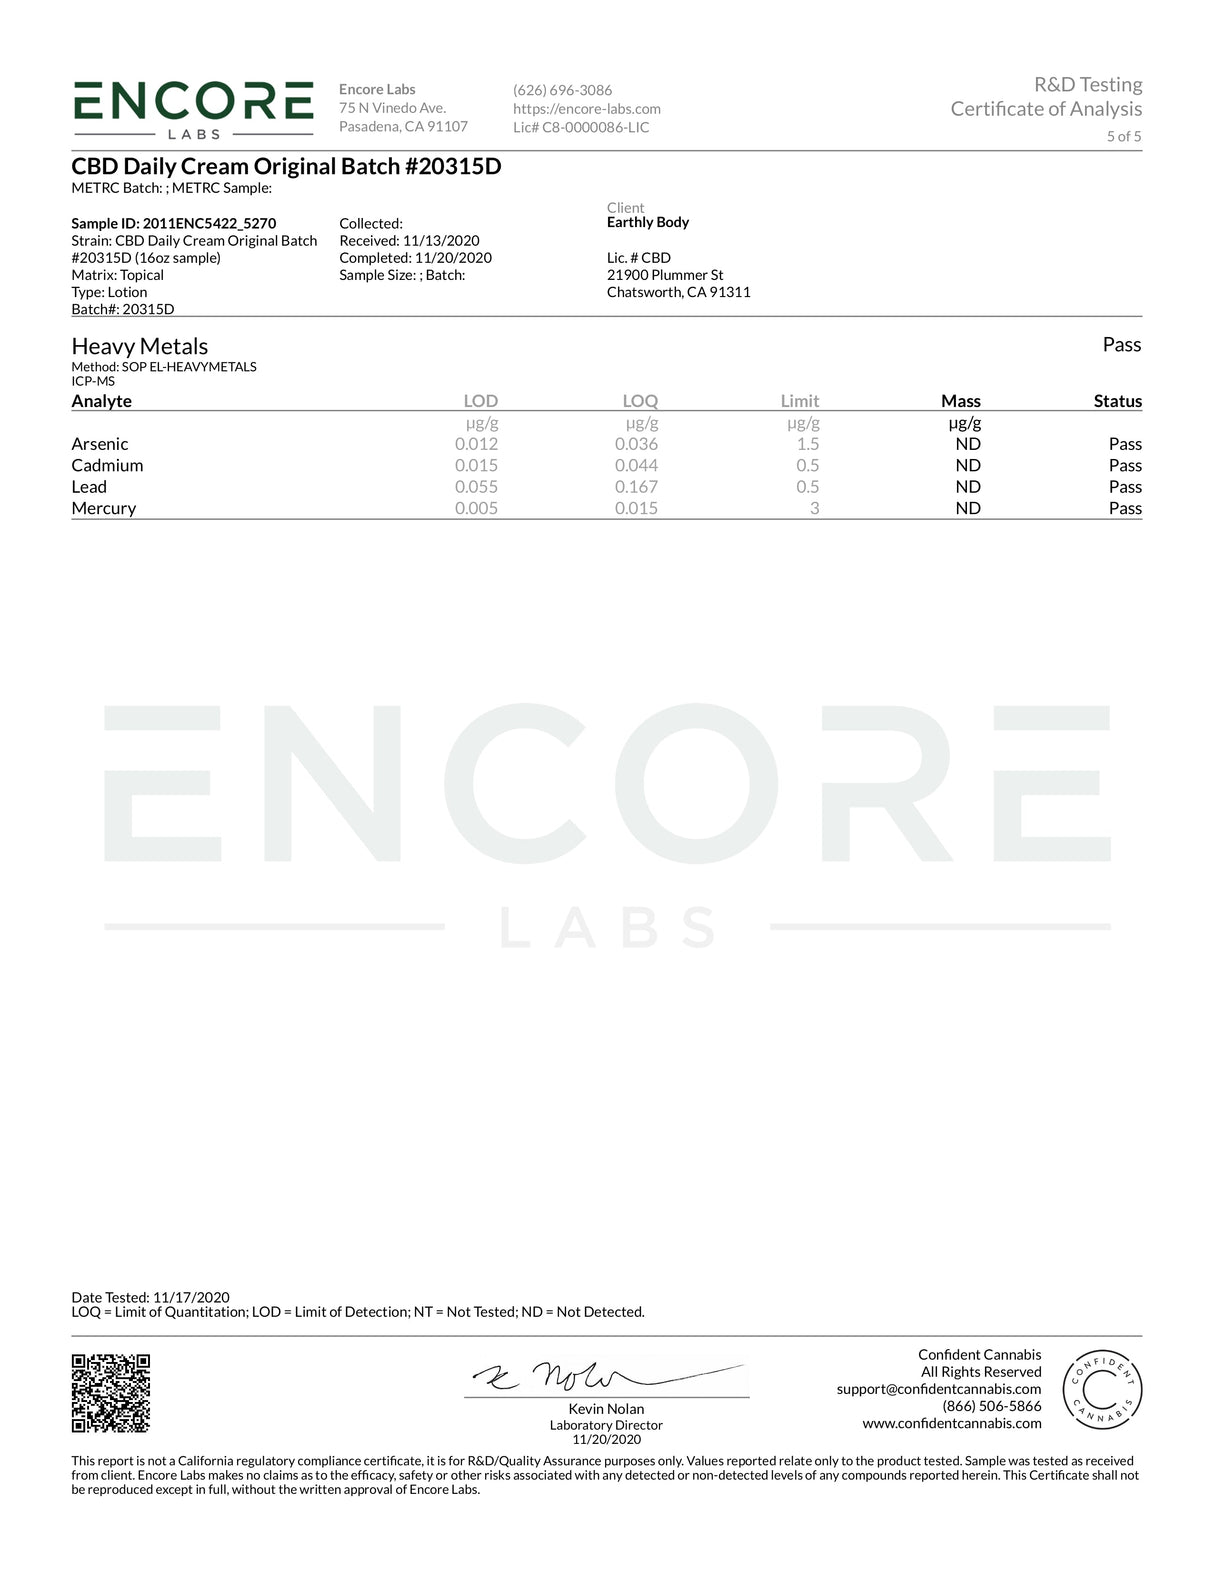 Certificate of Analysis for Earthly Body CBD Daily Intensive Cream, verifying CBD content and safety